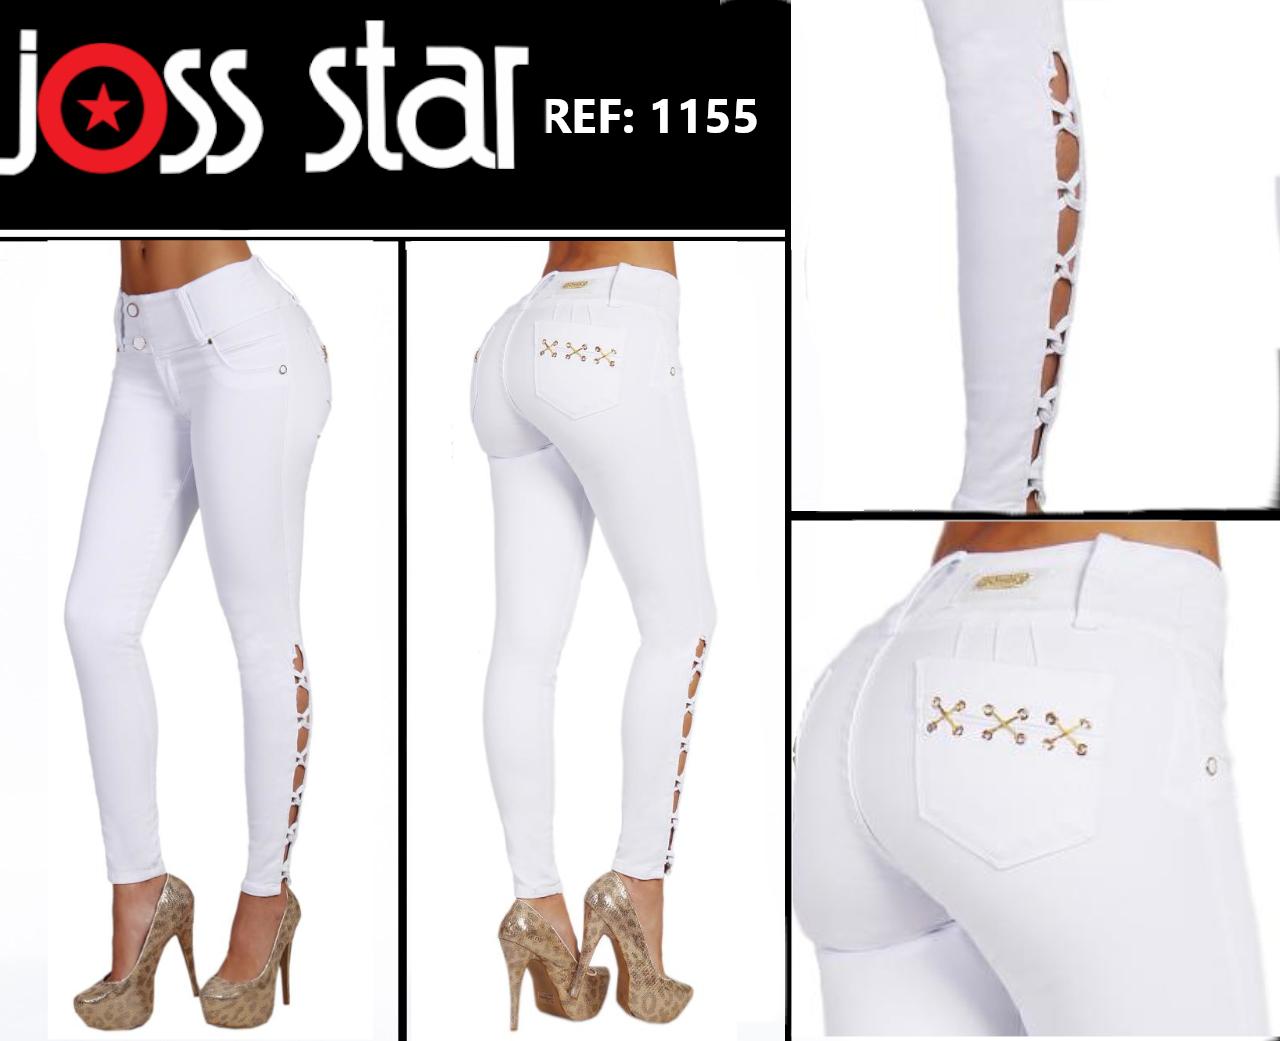 Lady´s Jeans Trousers White Color with Lift-up effect Brand Joss Star